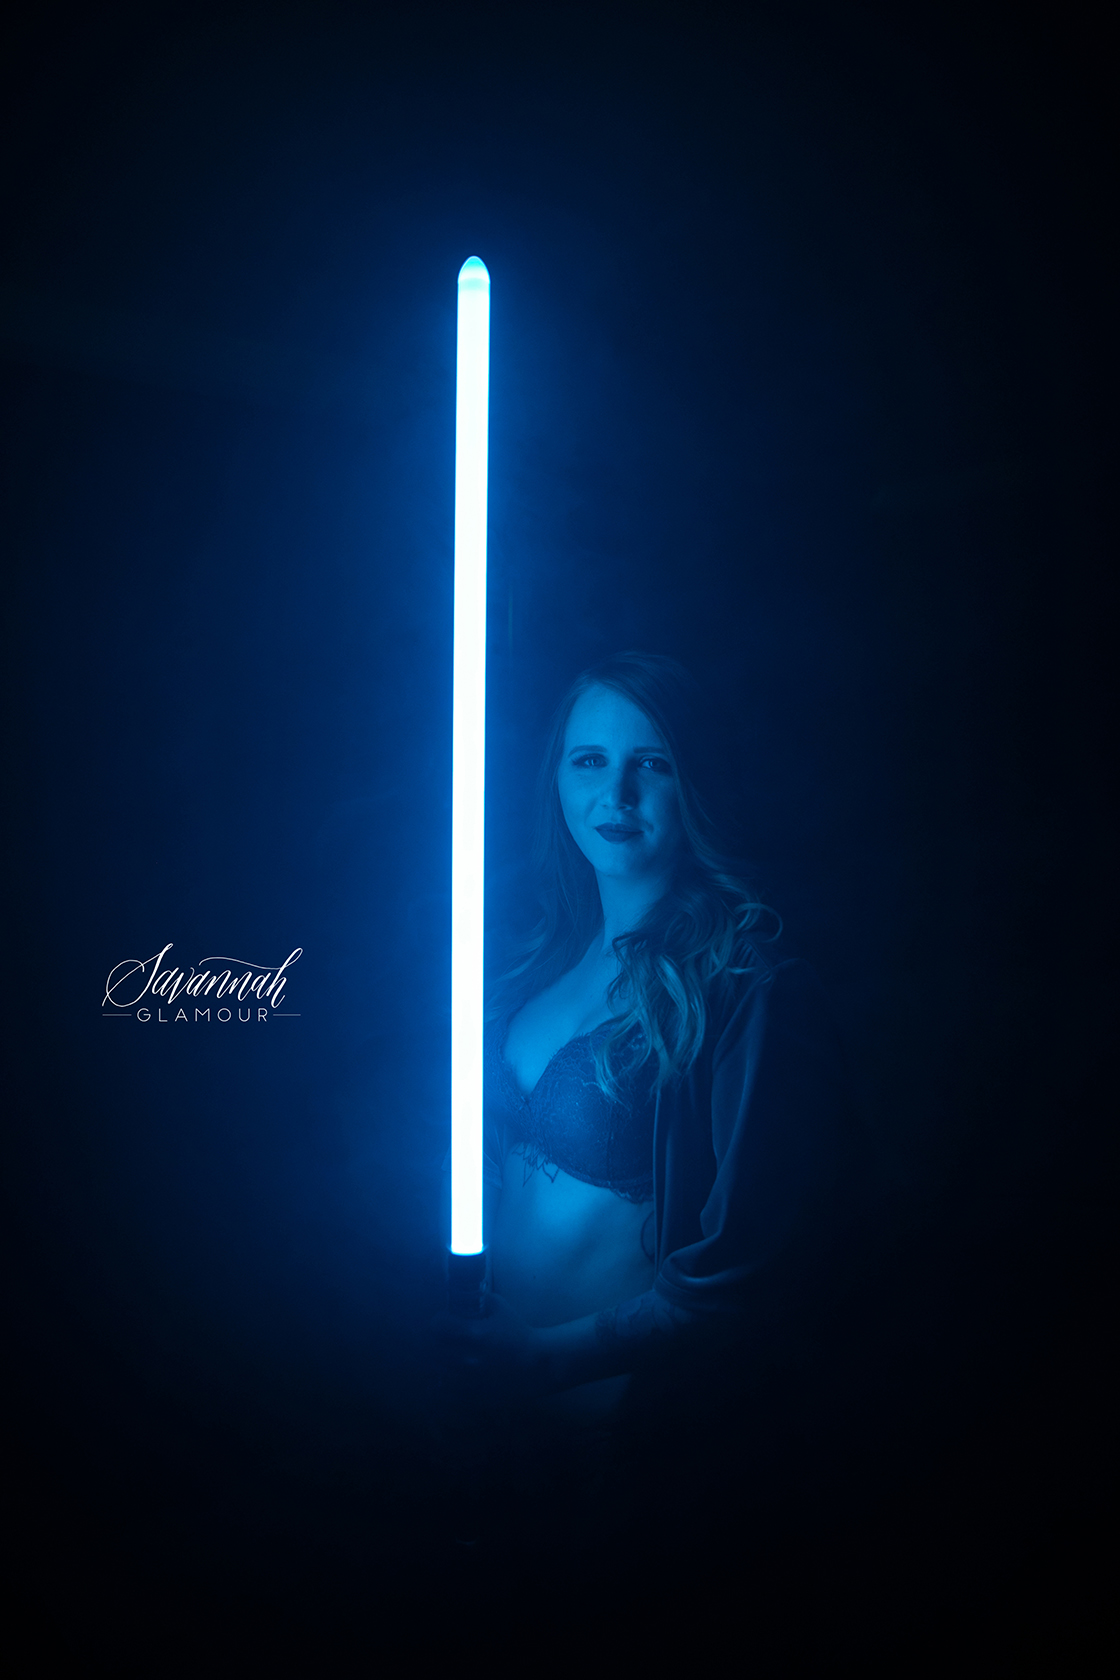 woman posing with a lightsaber in lingerie